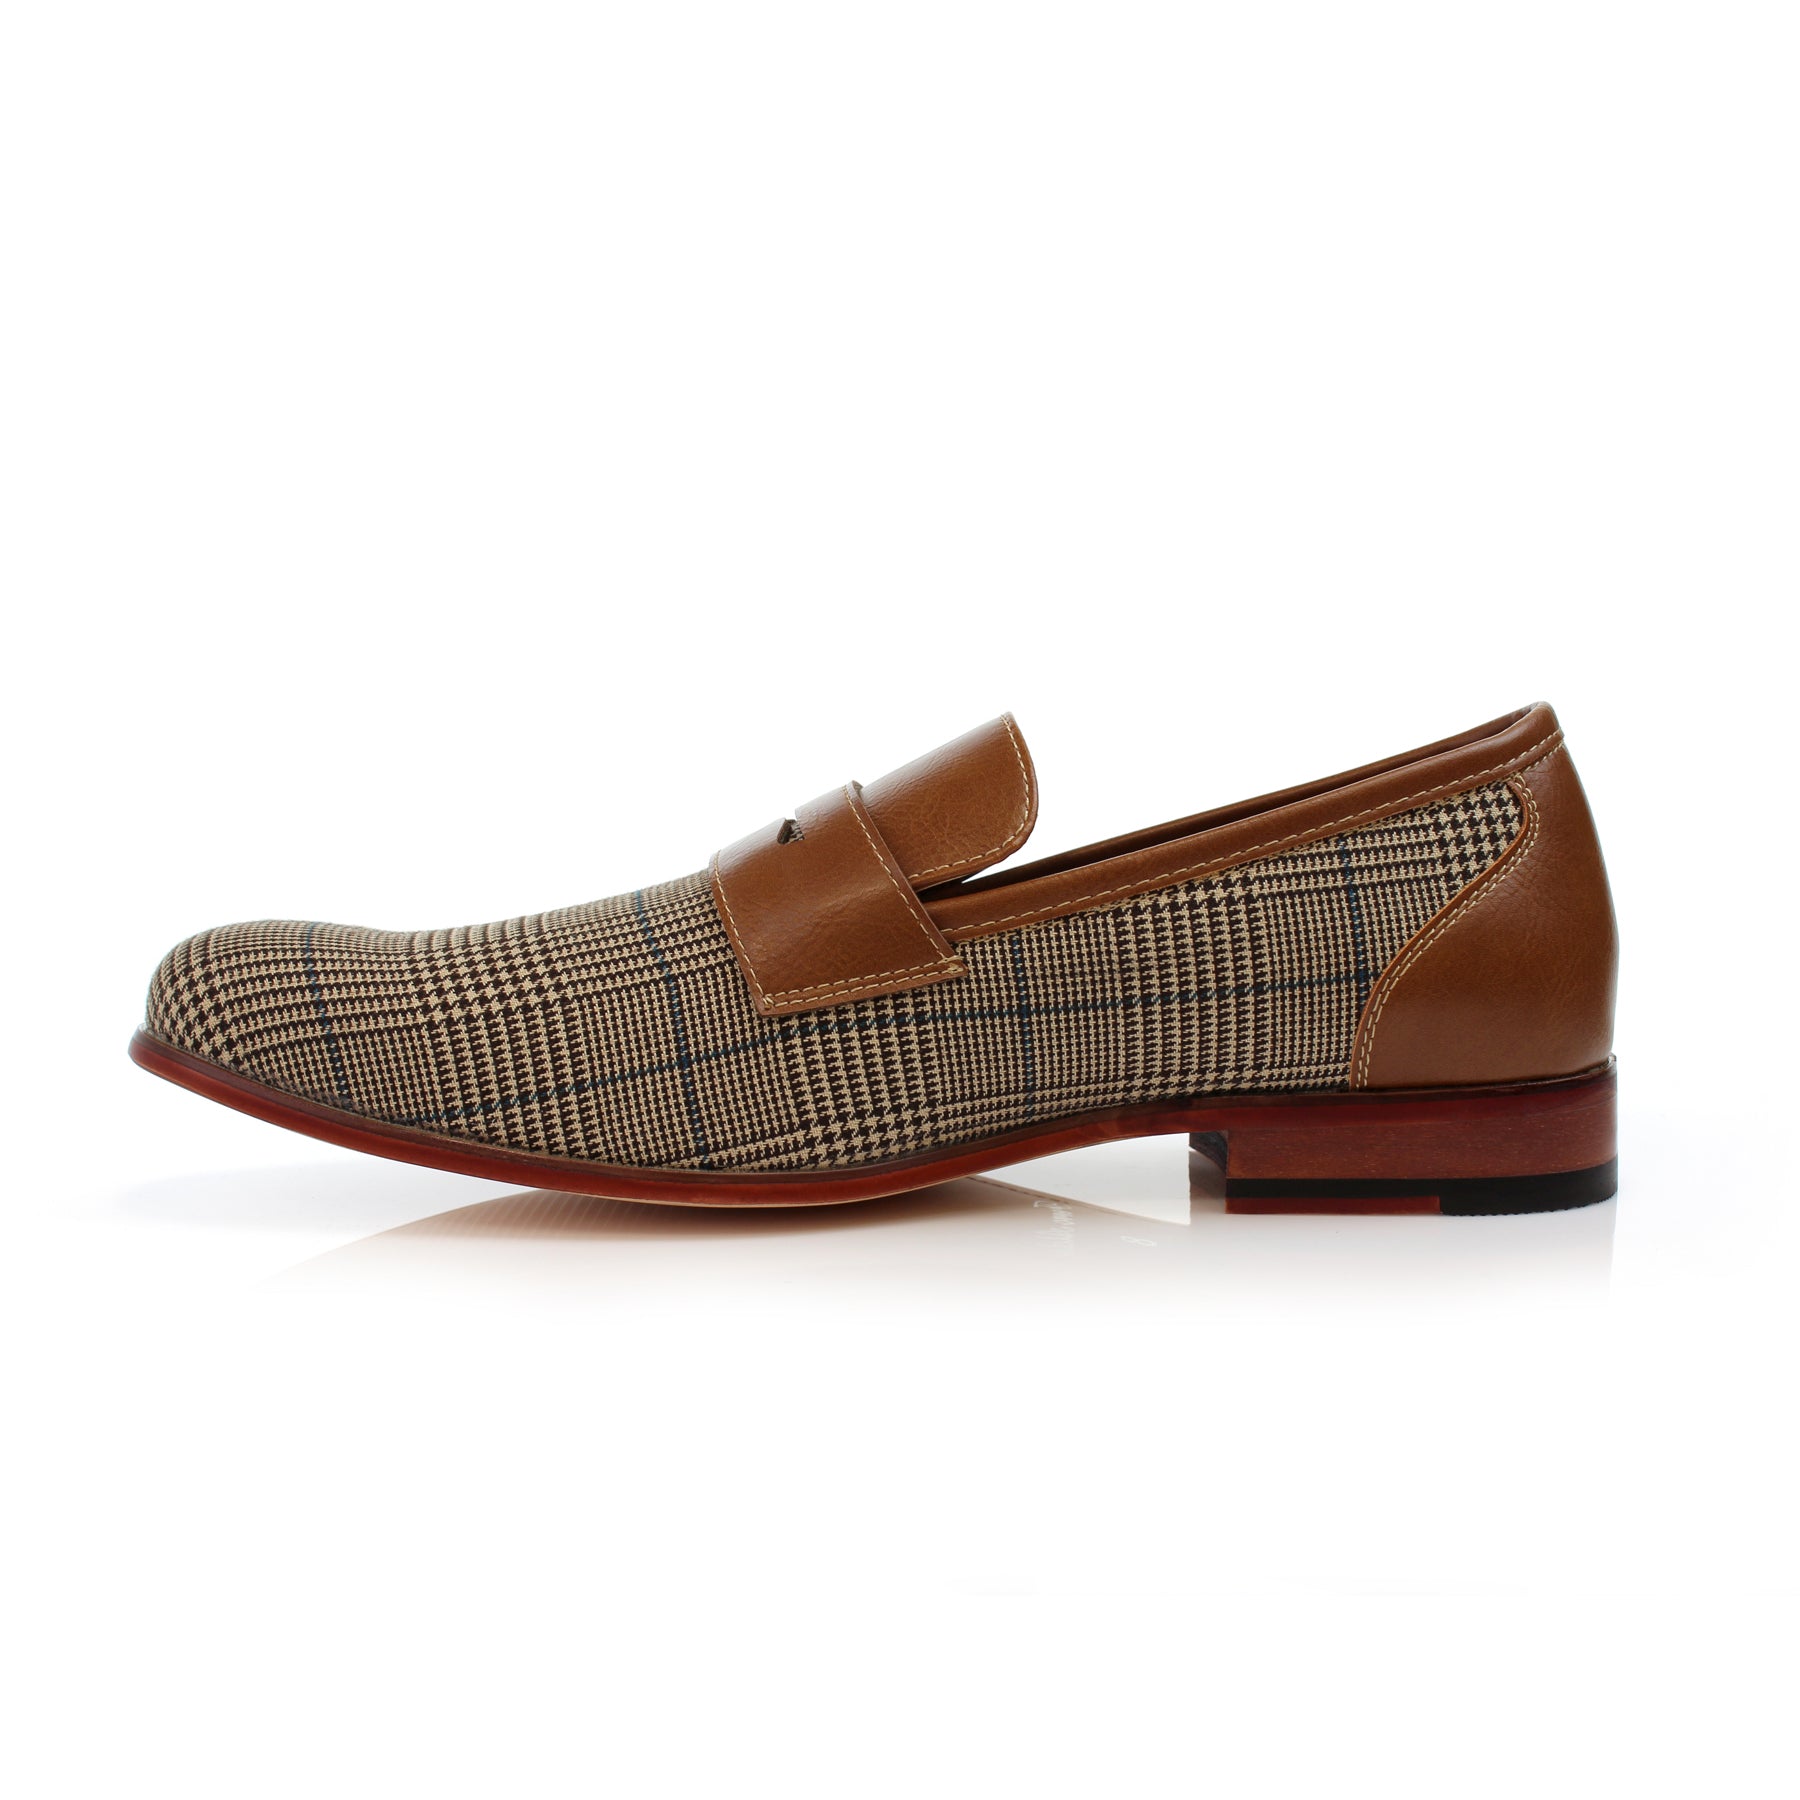 Plaid Loafers | Sidney by Ferro Aldo | Conal Footwear | inner Side Angle View